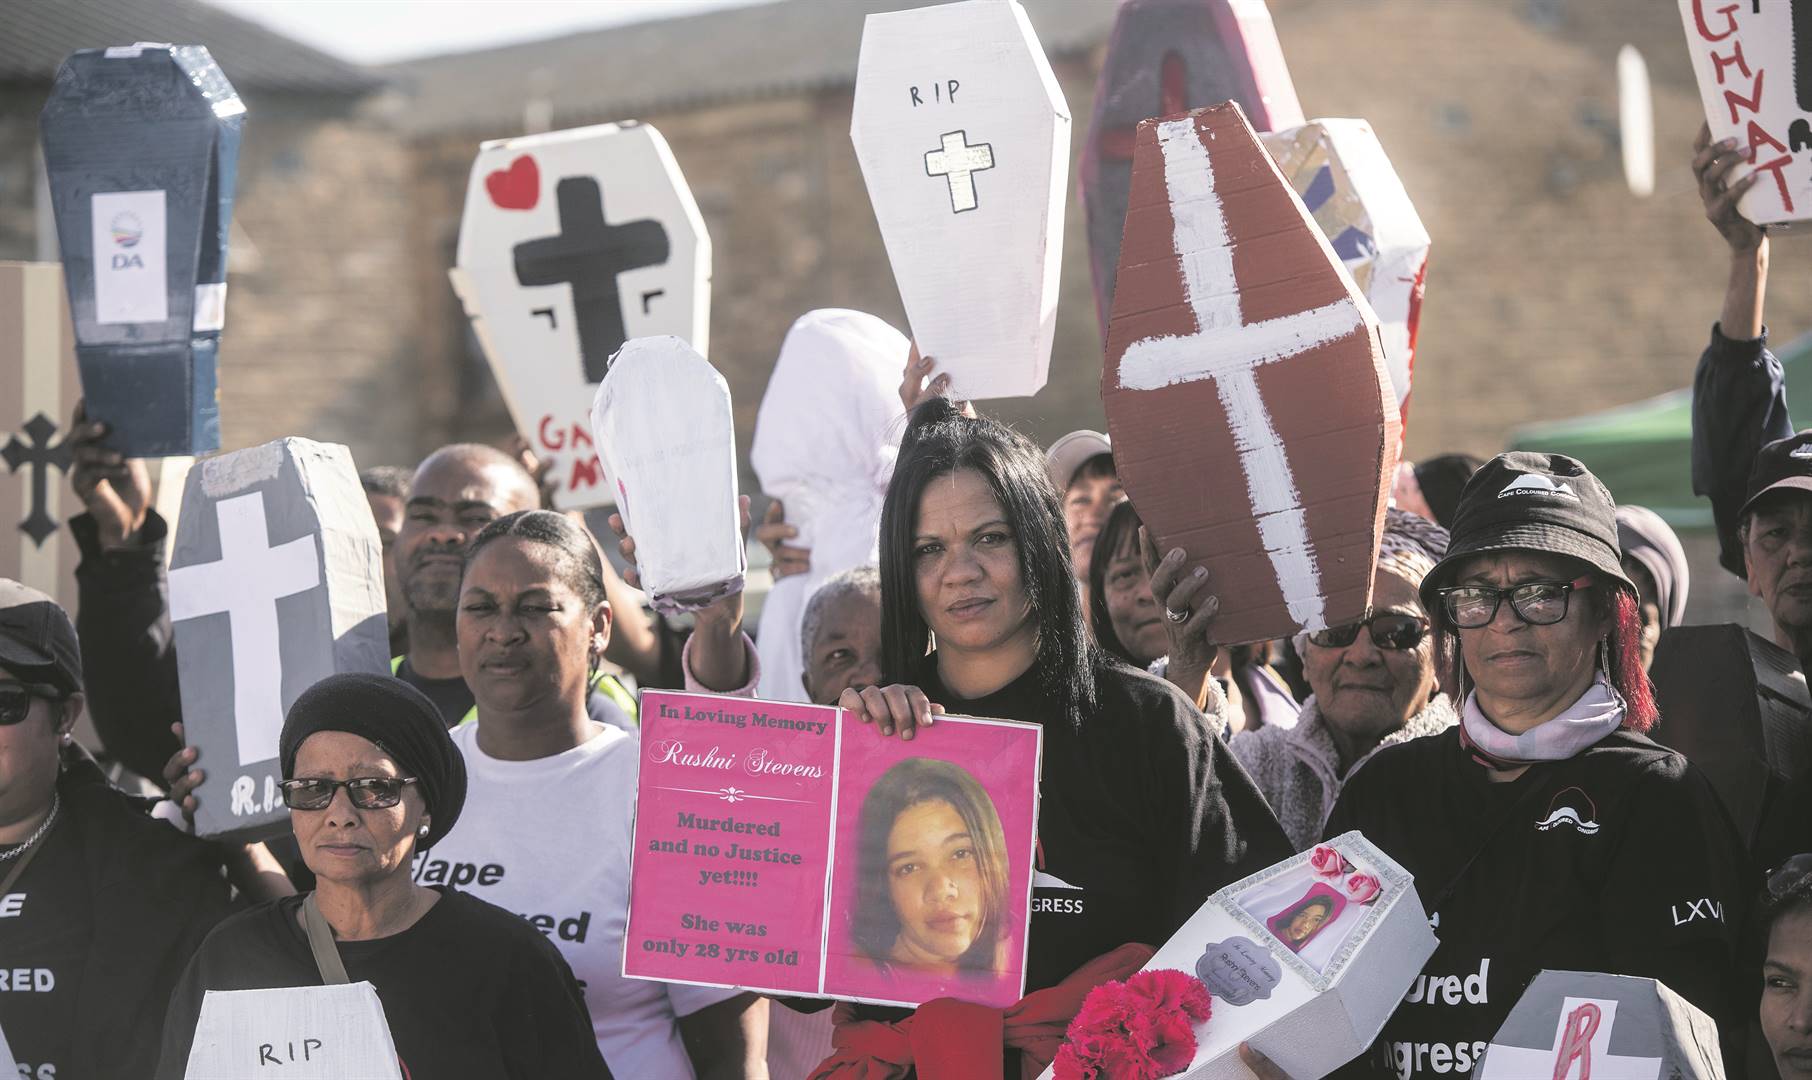 Families and members of the Cape Coloured Party in the Western Cape gather on Saturday opposite the Manenberg Police Station in Cape Town with coffins representing the young people killed in gang violence in the province. They staged the protest the day after Police Minister Bheki Cele released the newest crime statistics on Friday. Photo: Gallo Images